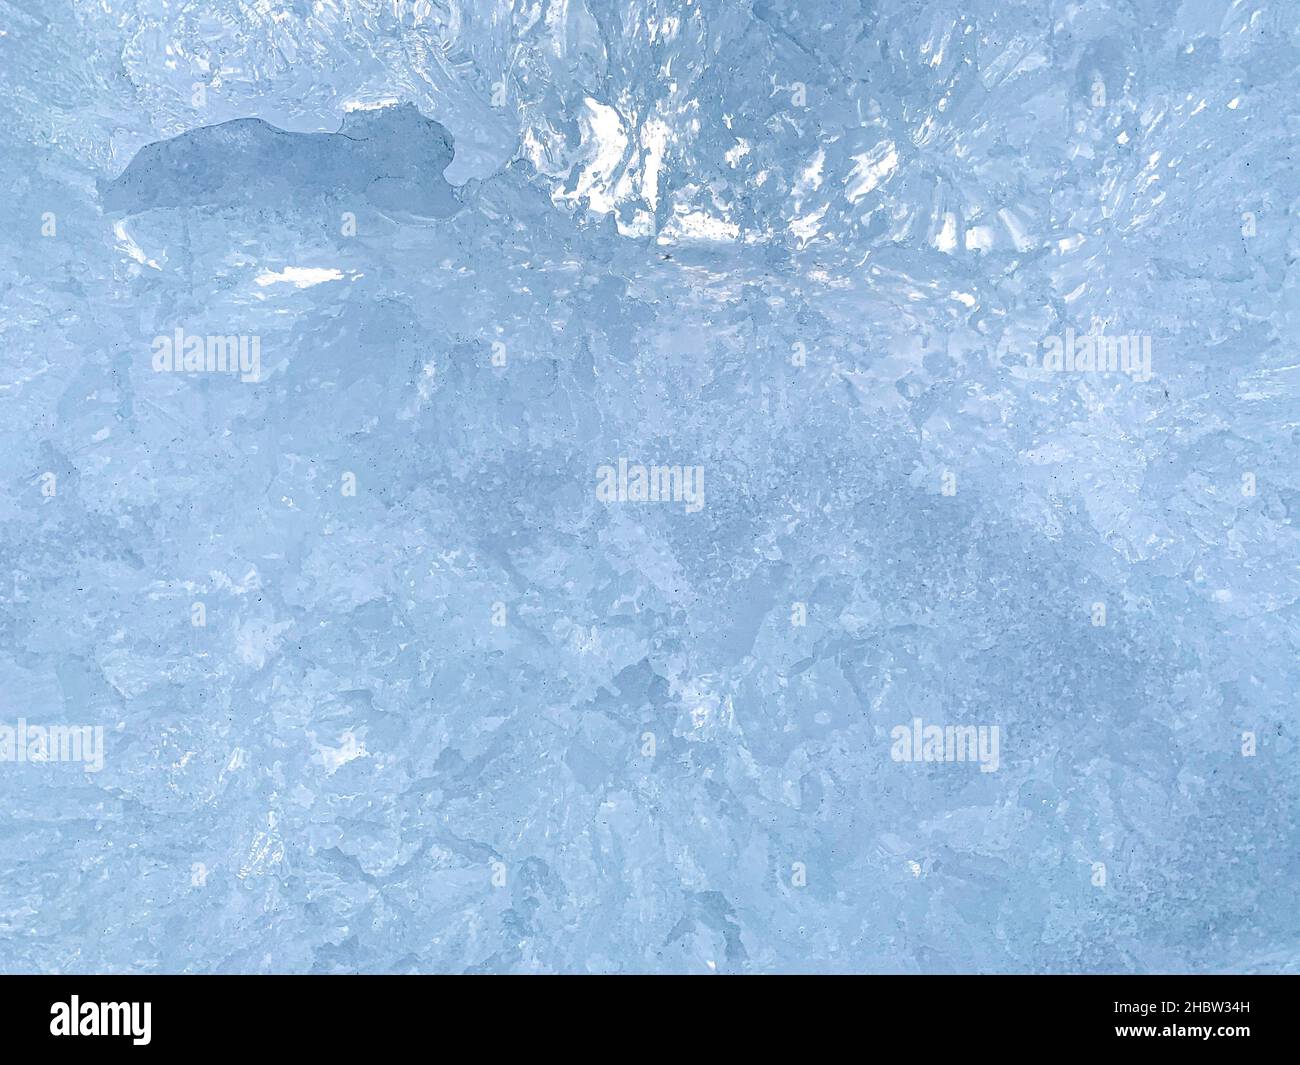 An abstract relatively uniform background with blue streaks and transparent ice crystals in a single slice fragment. Stock Photo